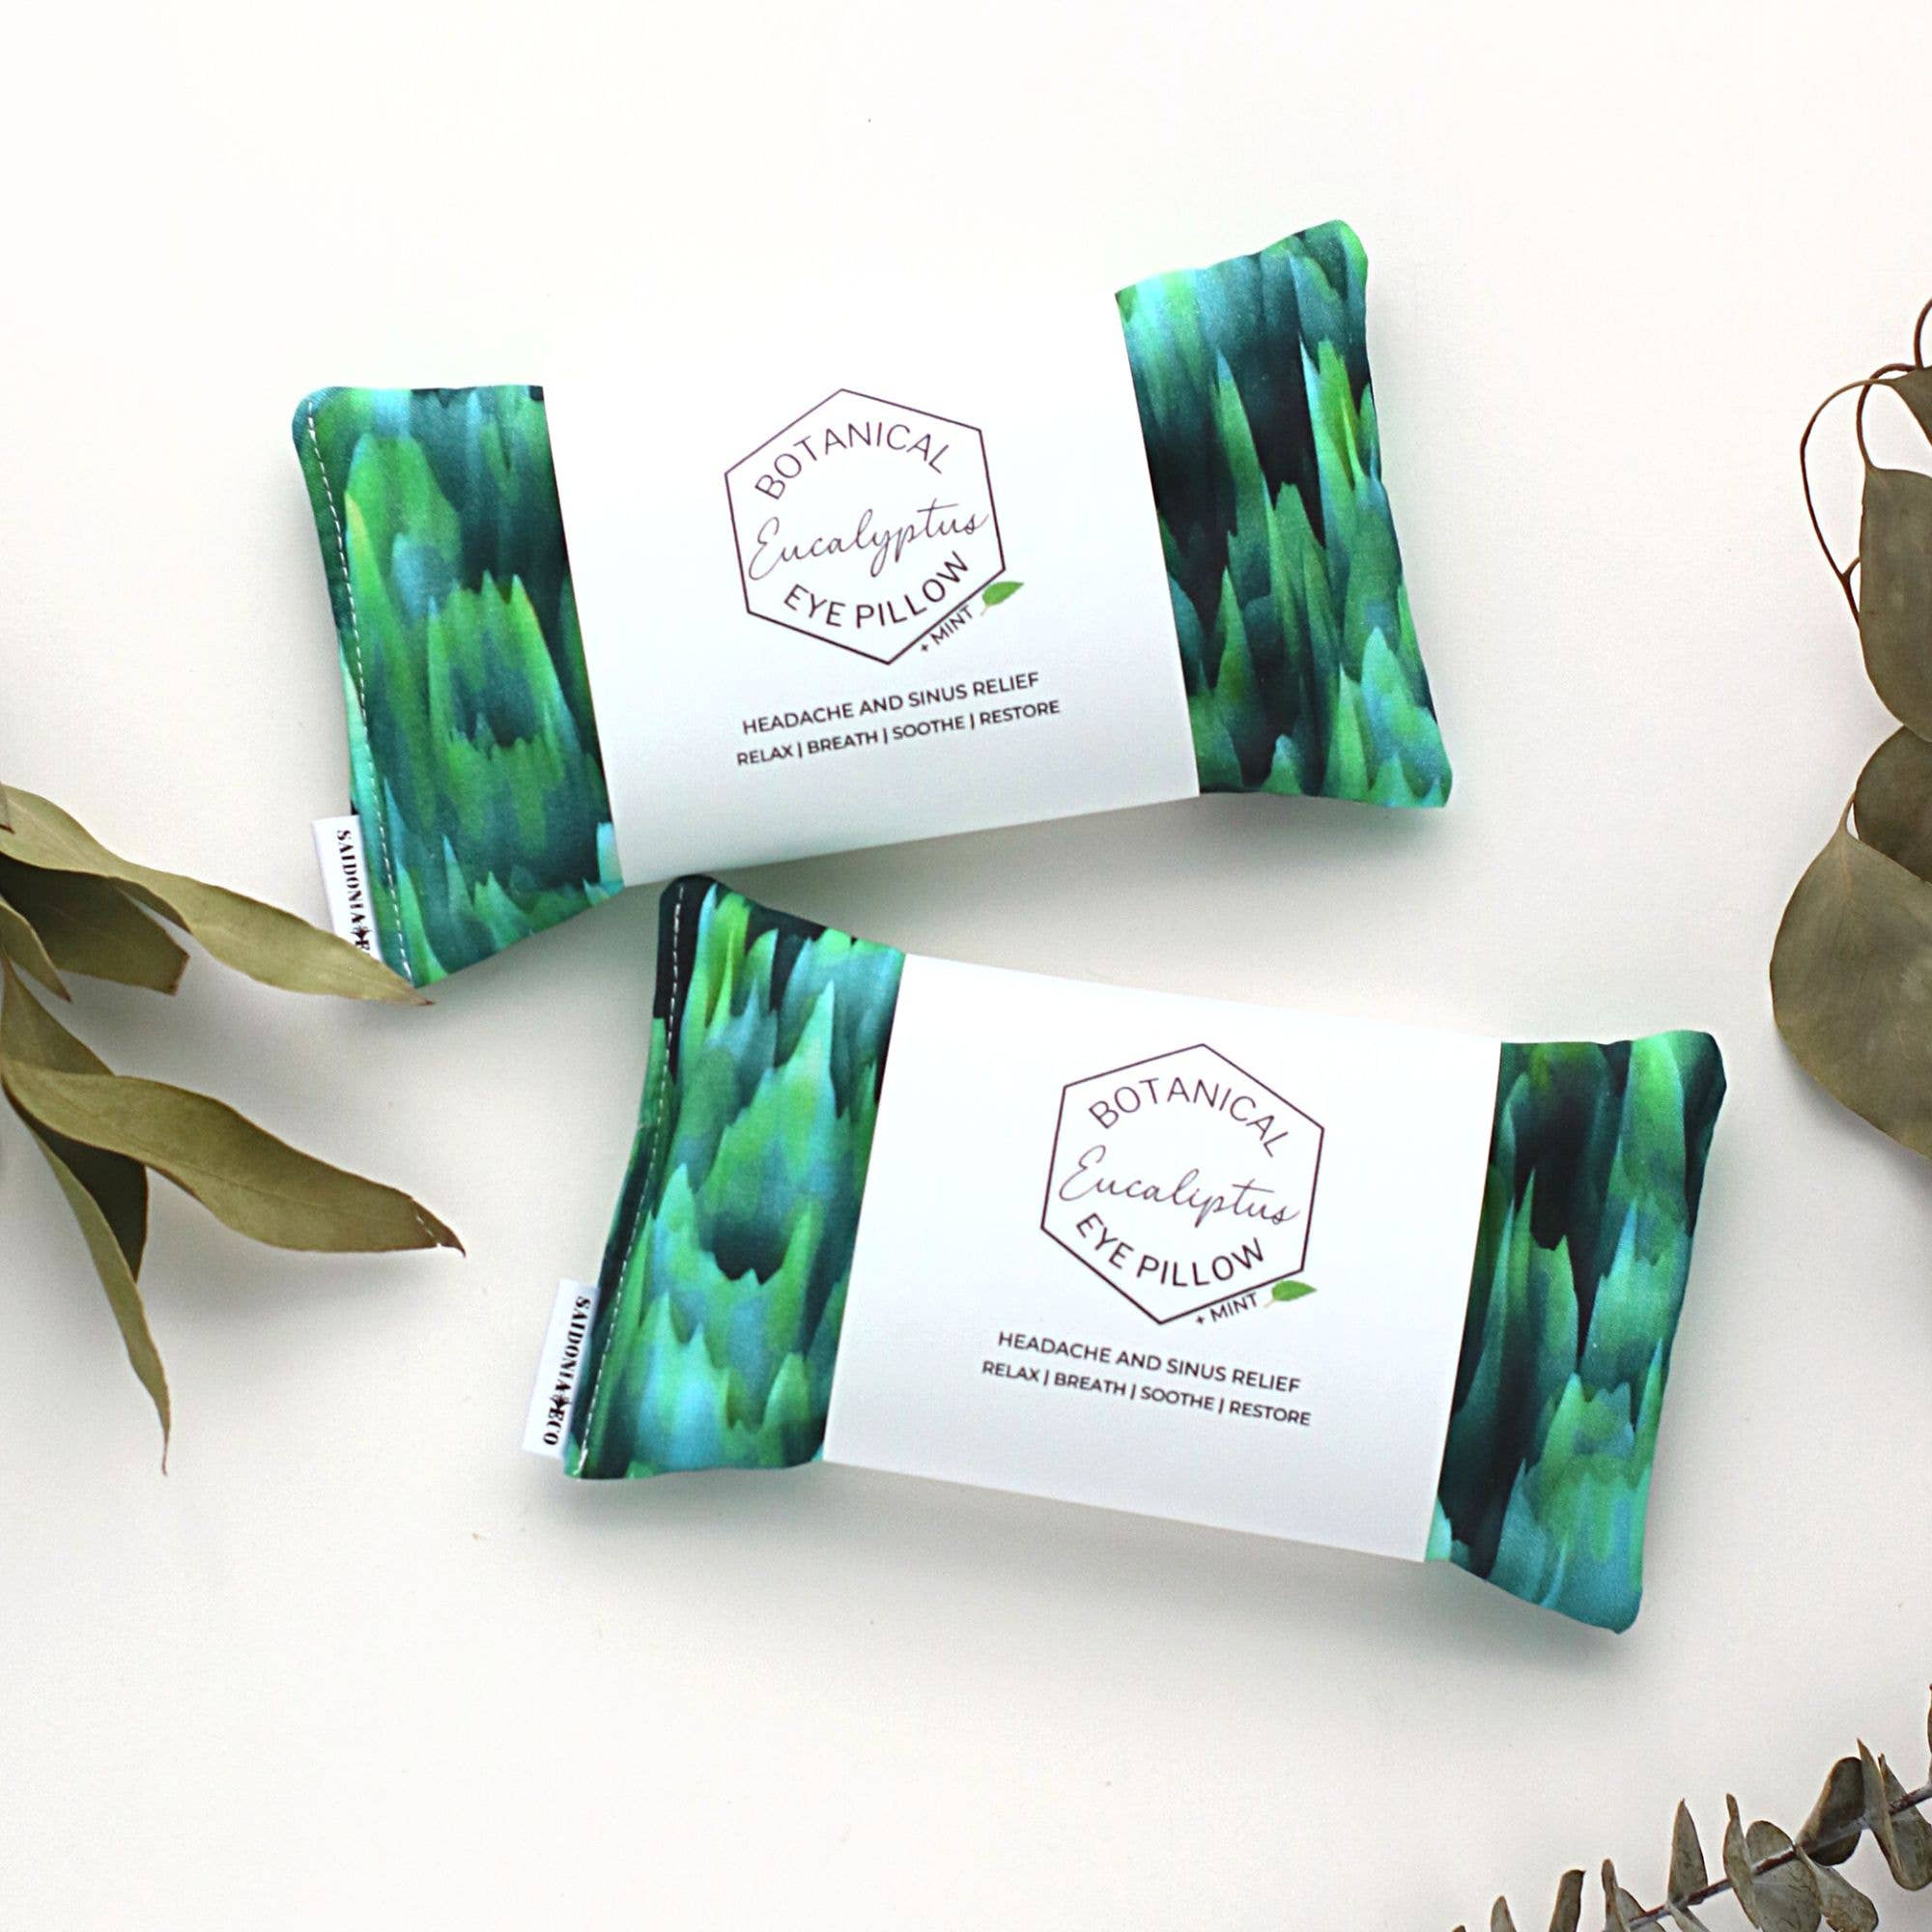 Three Breathe Gift Sets: Winter Eucalyptus Eye Pillows & Handmade Breathe Balms with green and blue tie-dye patterns, displayed on a white background surrounded by eucalyptus leaves from SaidoniaEco.